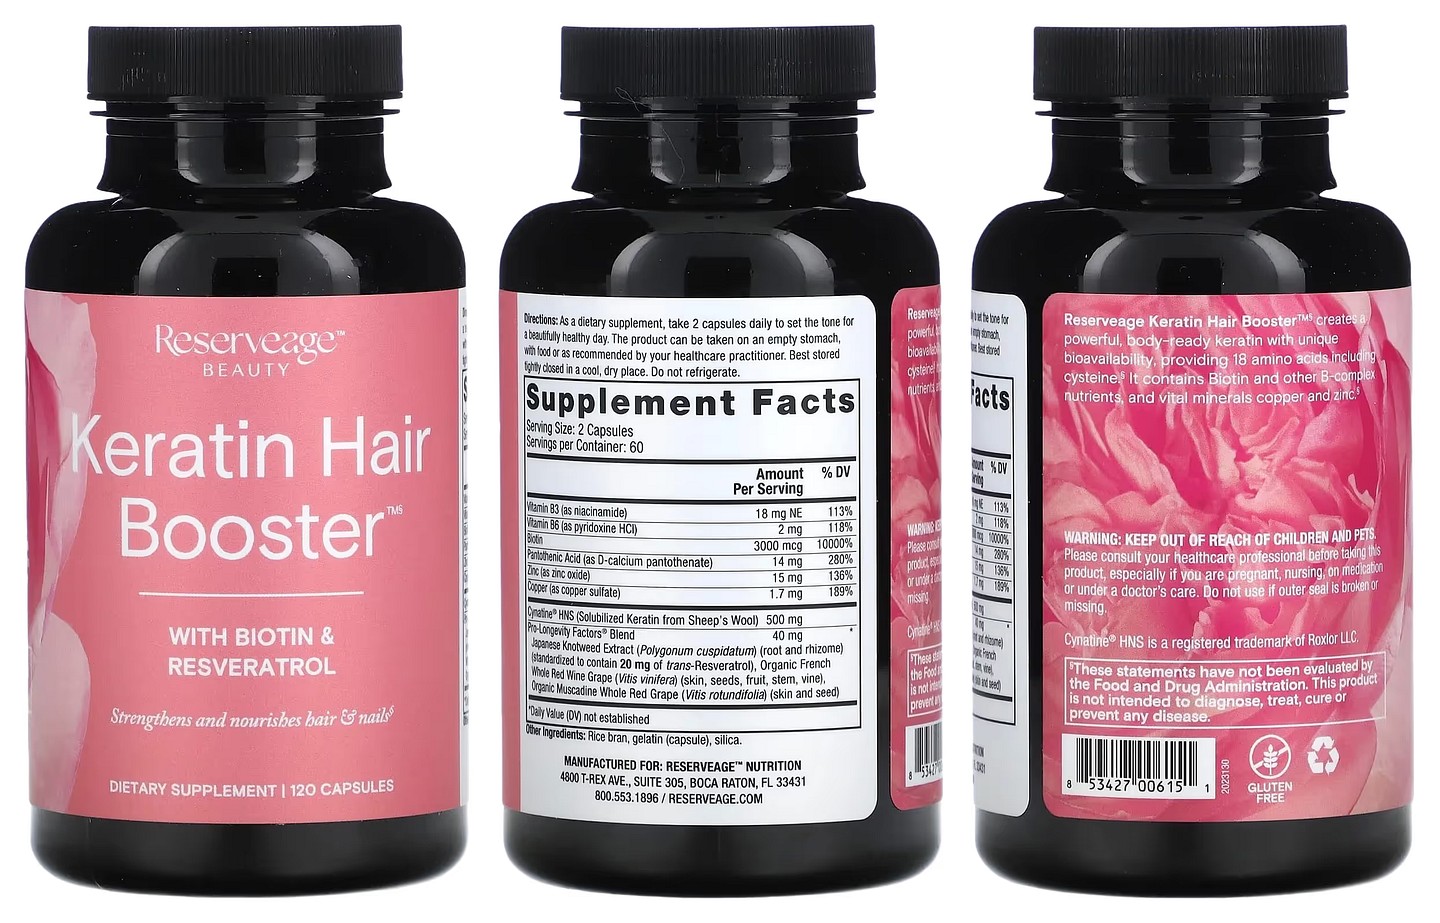 Reserveage Nutrition, Keratin Hair Booster with Biotin & Resveratrol packaging